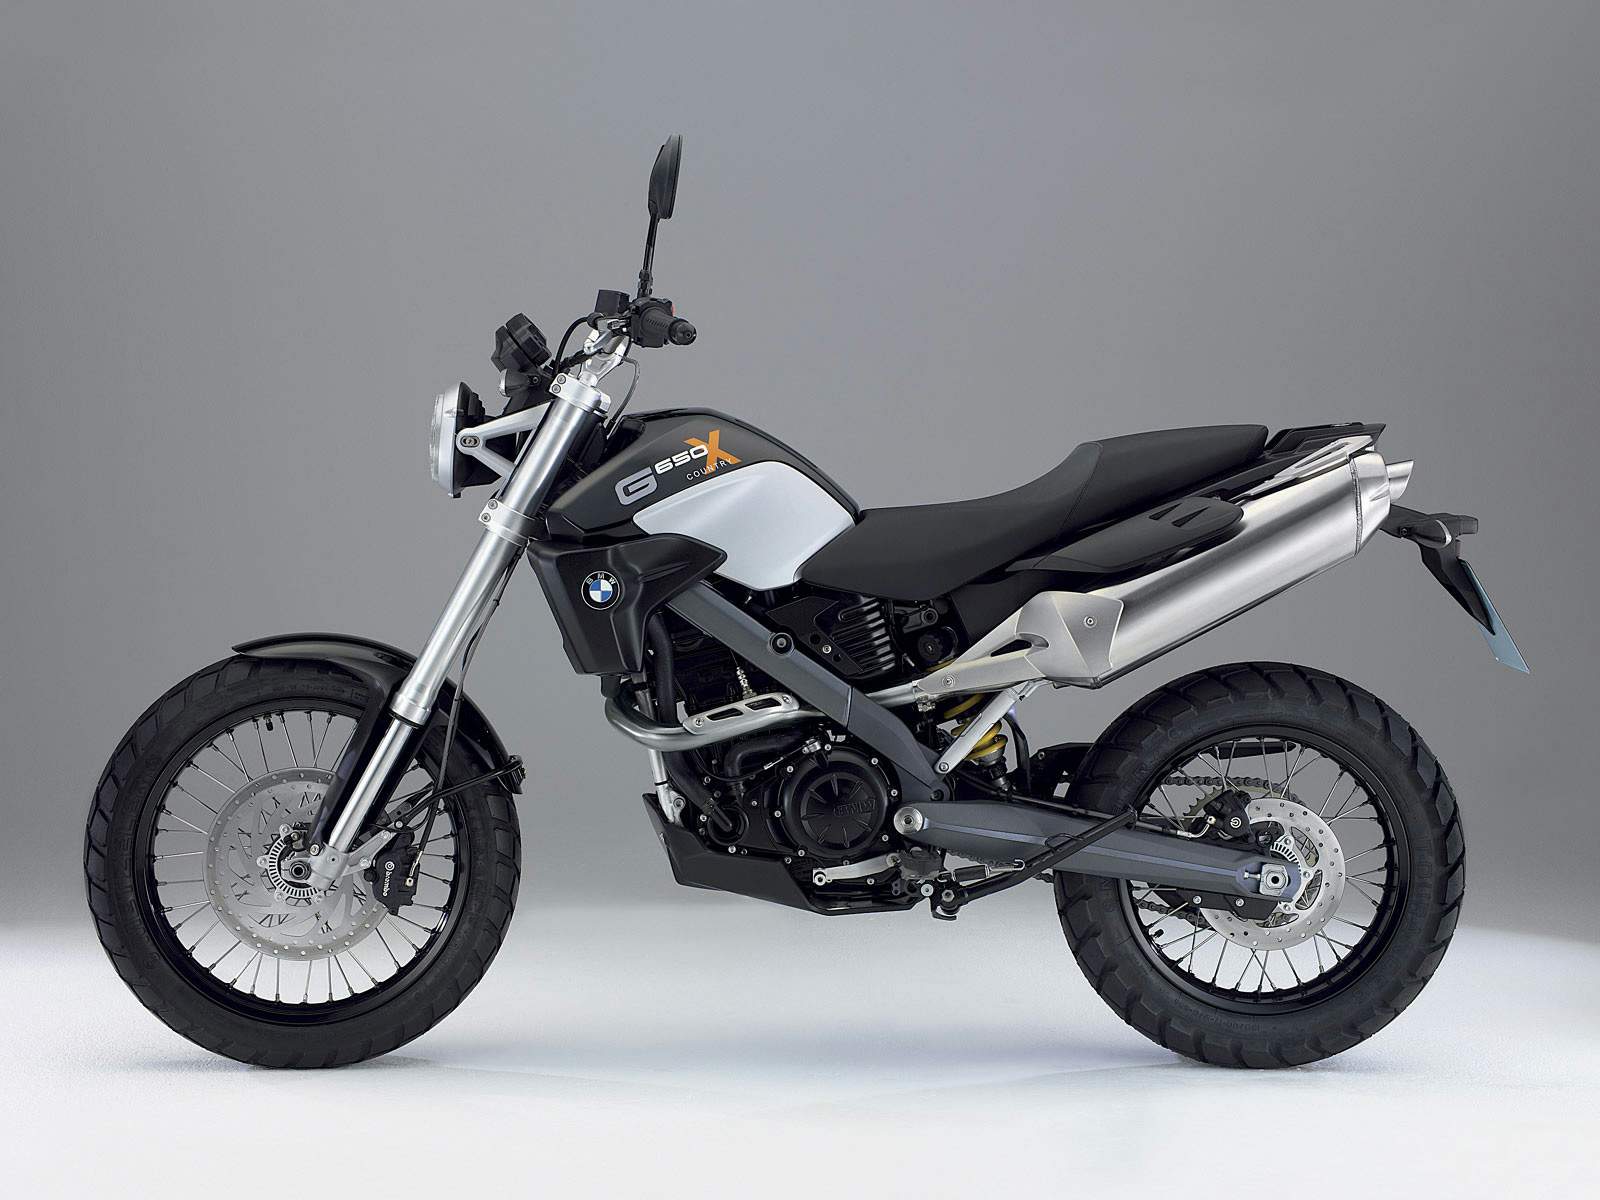 Bmw g 650 xcountry specifications #3